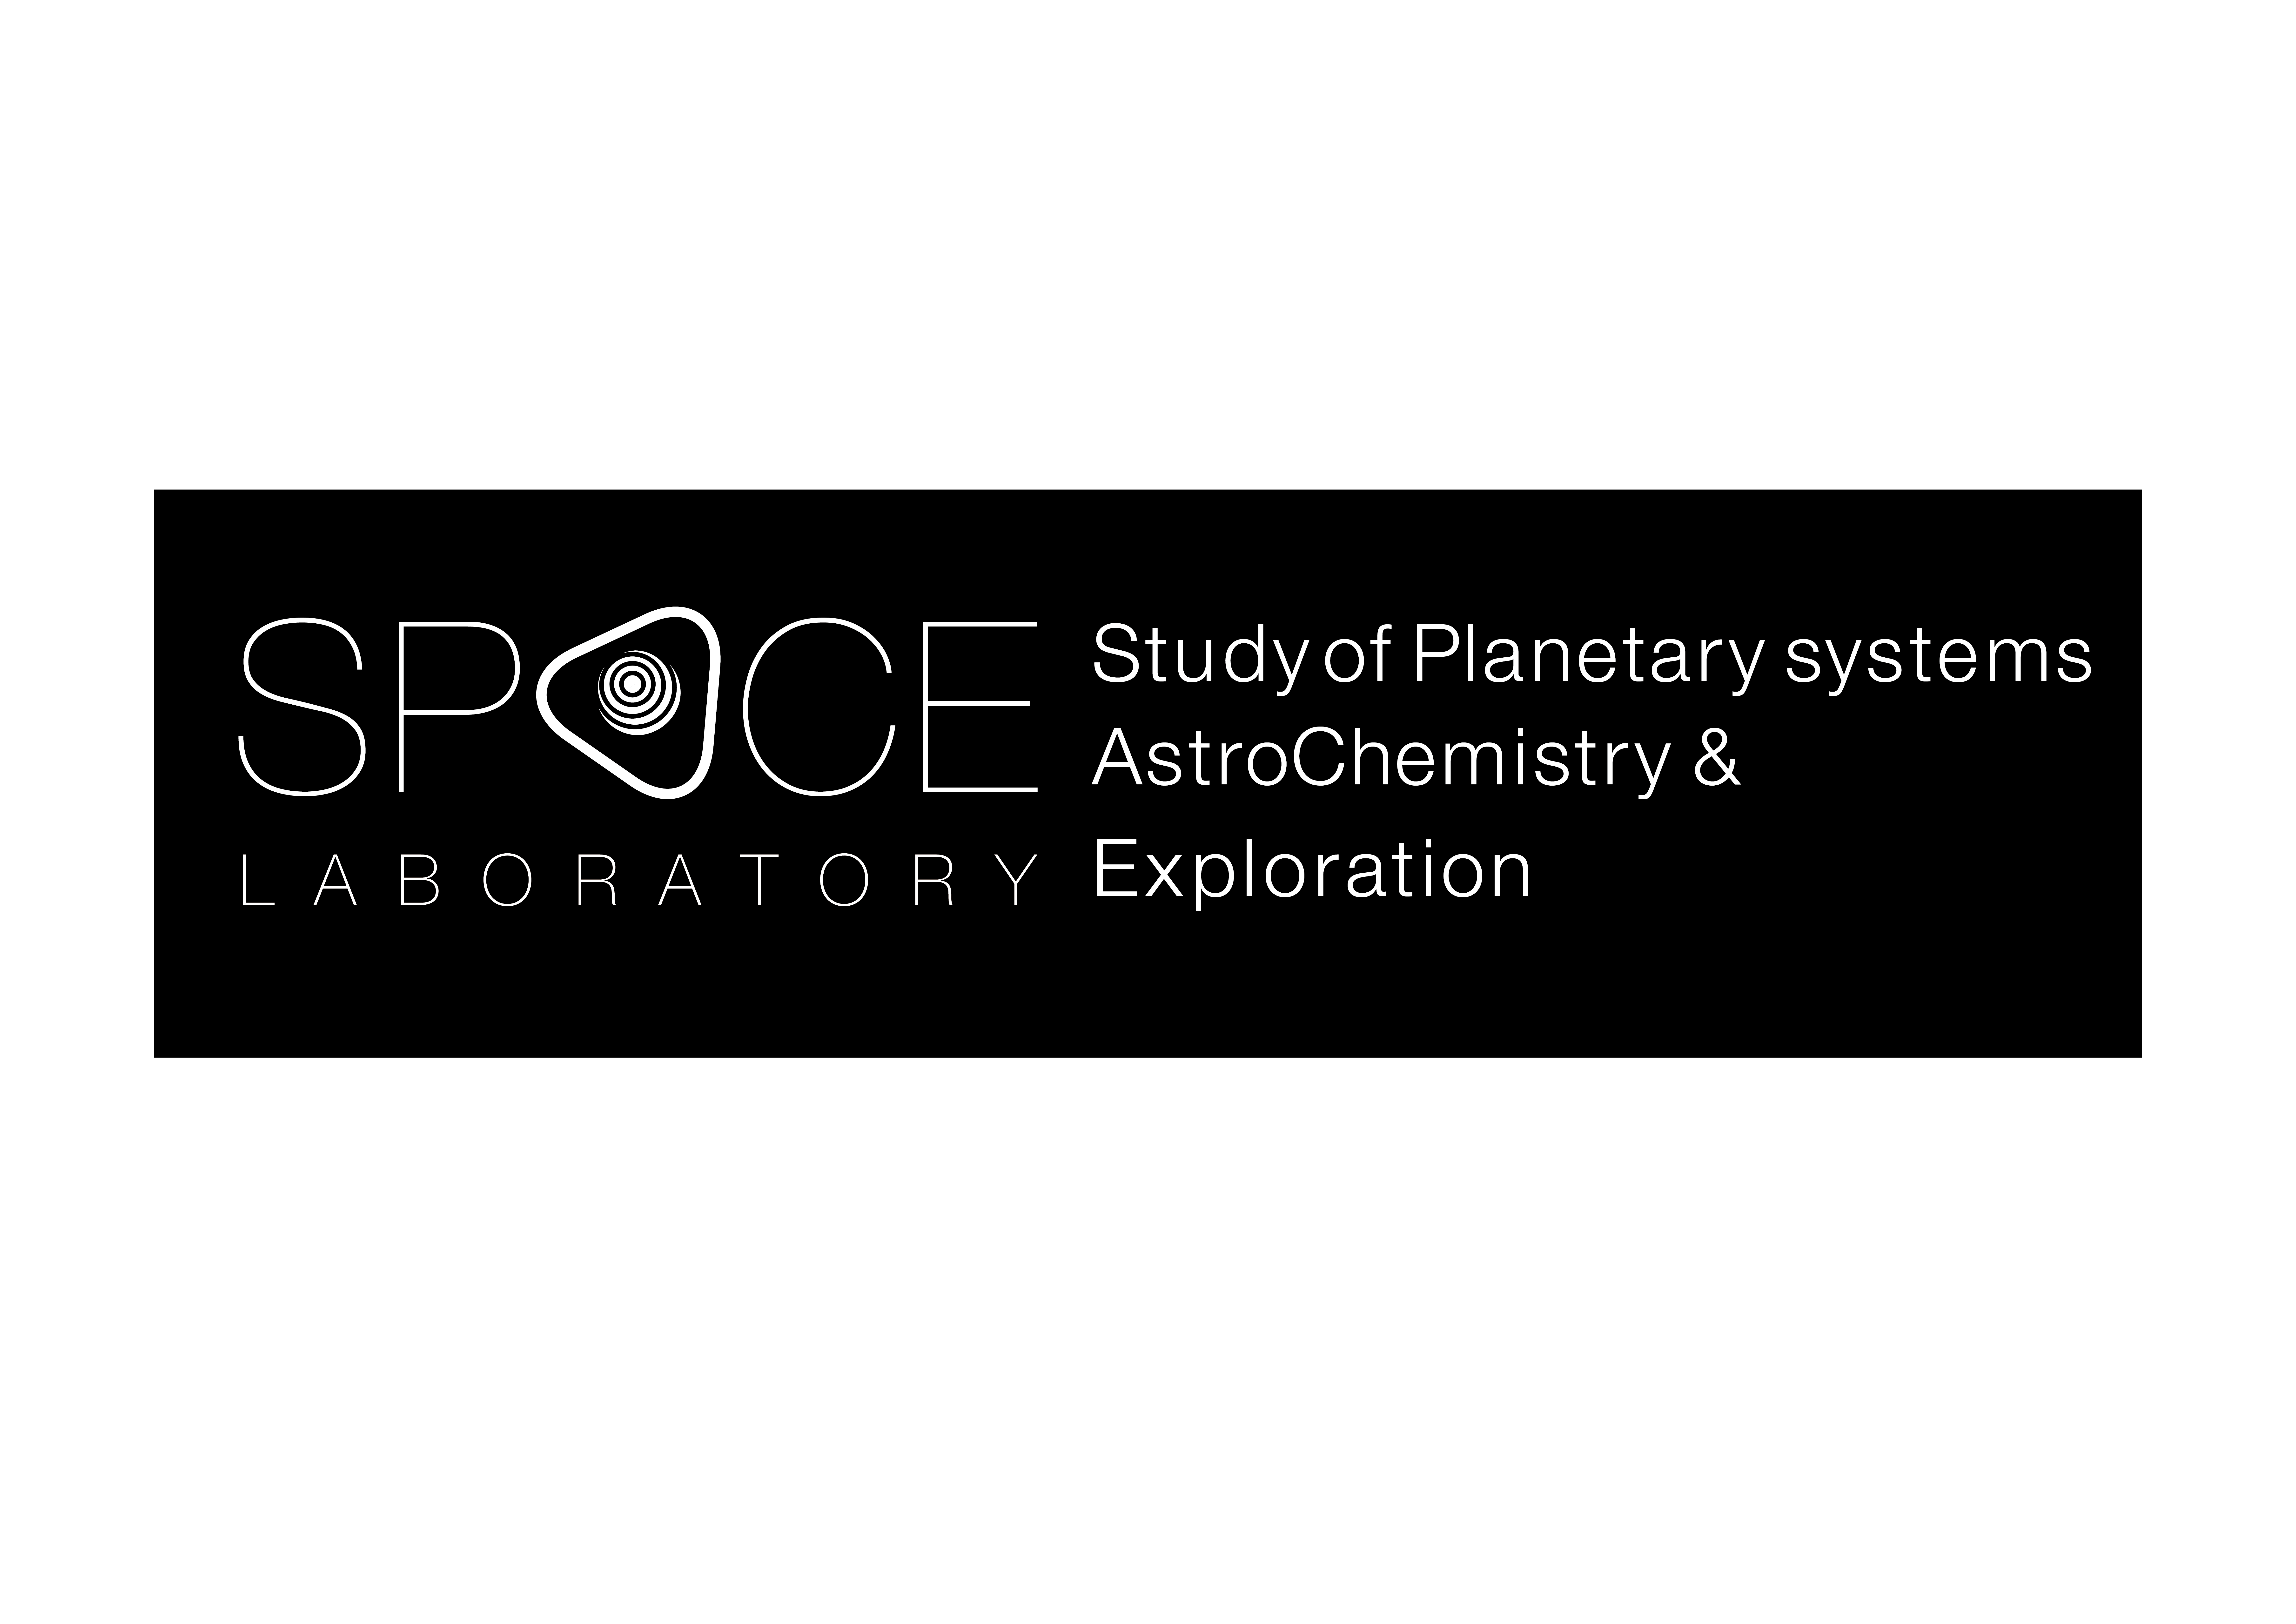 Study of Planetary systems AstroChemistry & Exploration